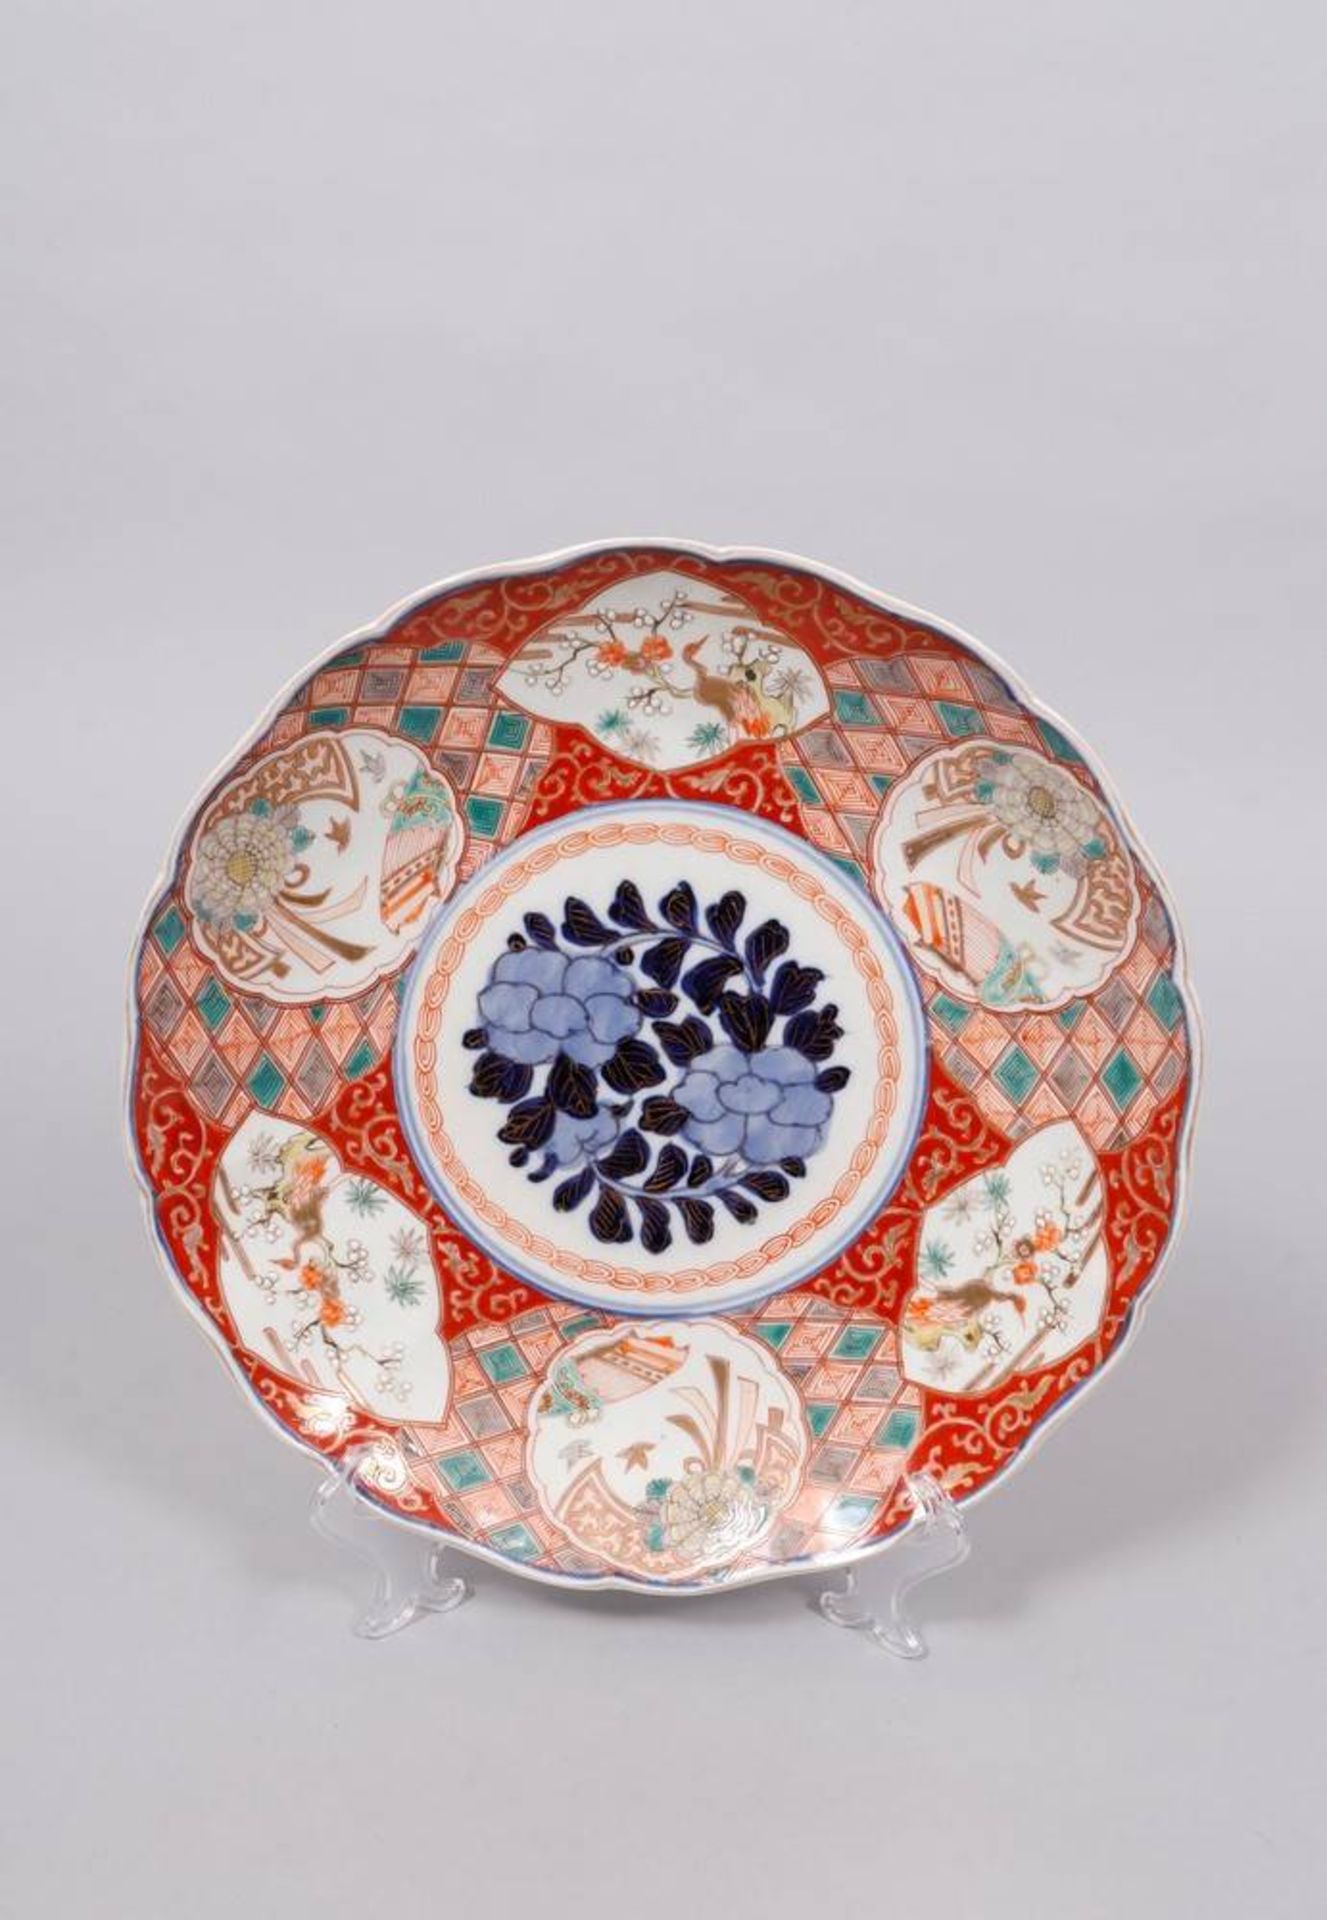 Imari-dish, China, 19th C., porcelain, painted in underglaze blue/iron red/green/gold and grey 